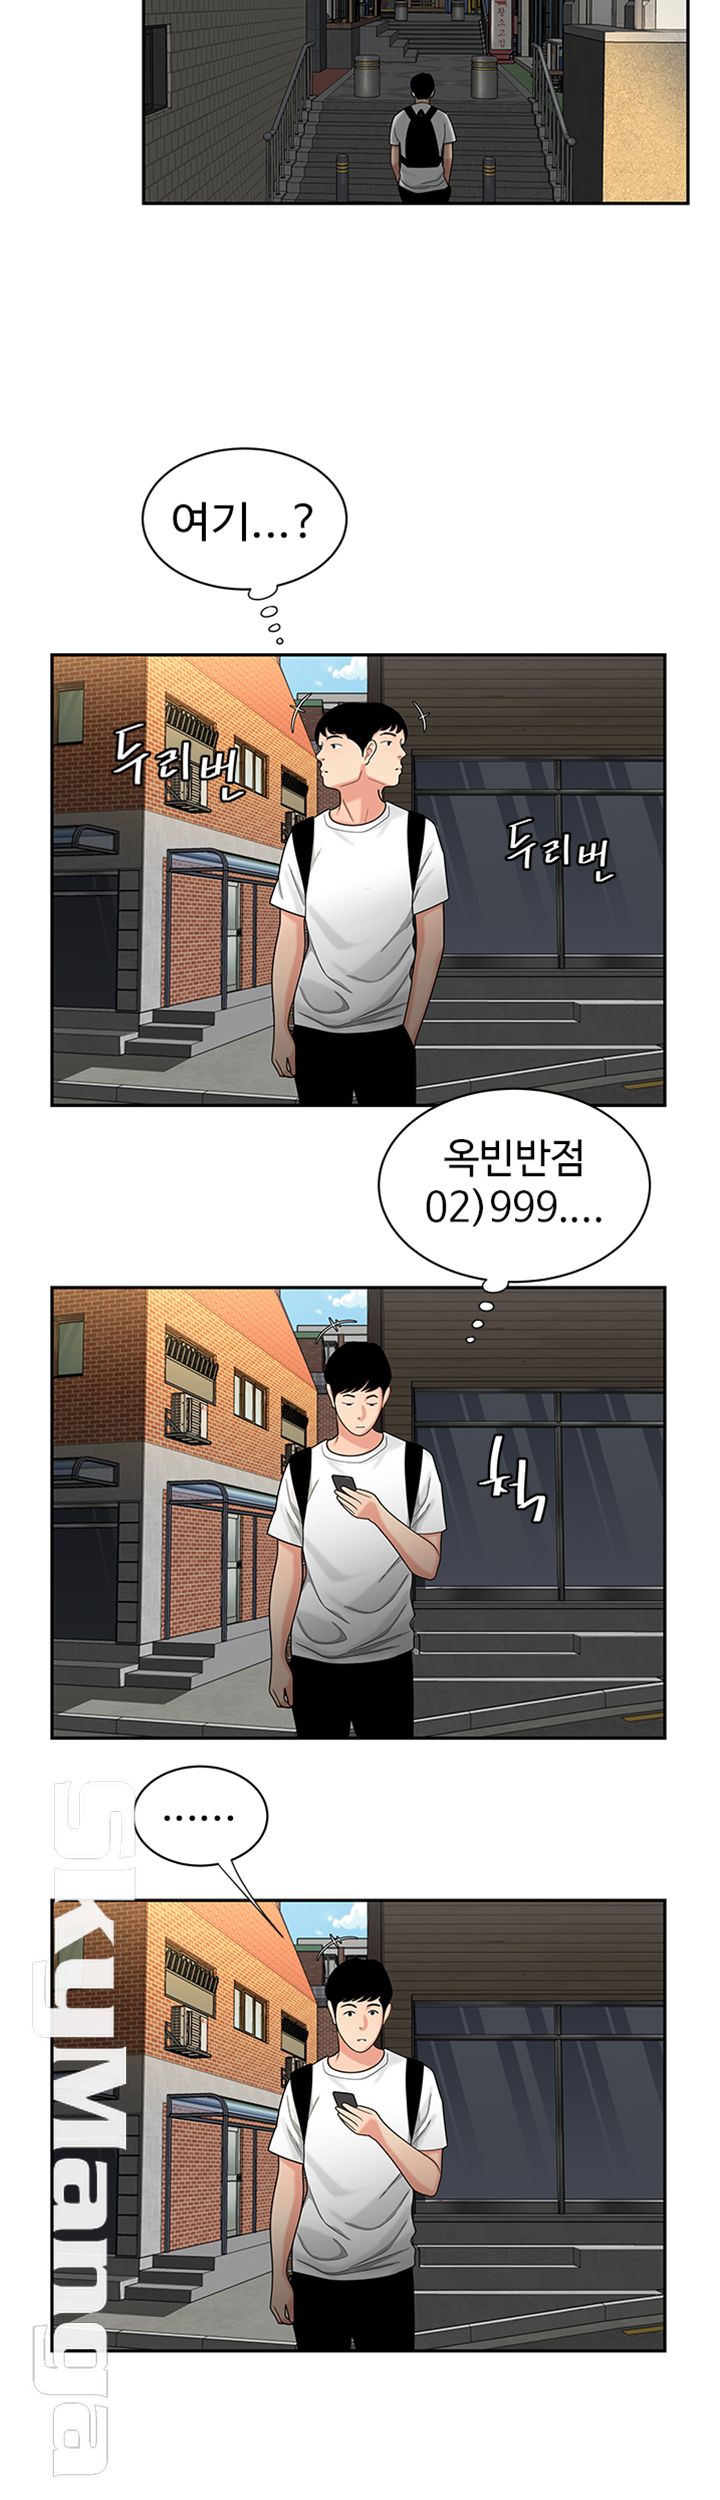 Delivery Man Raw - Chapter 1 Page 2